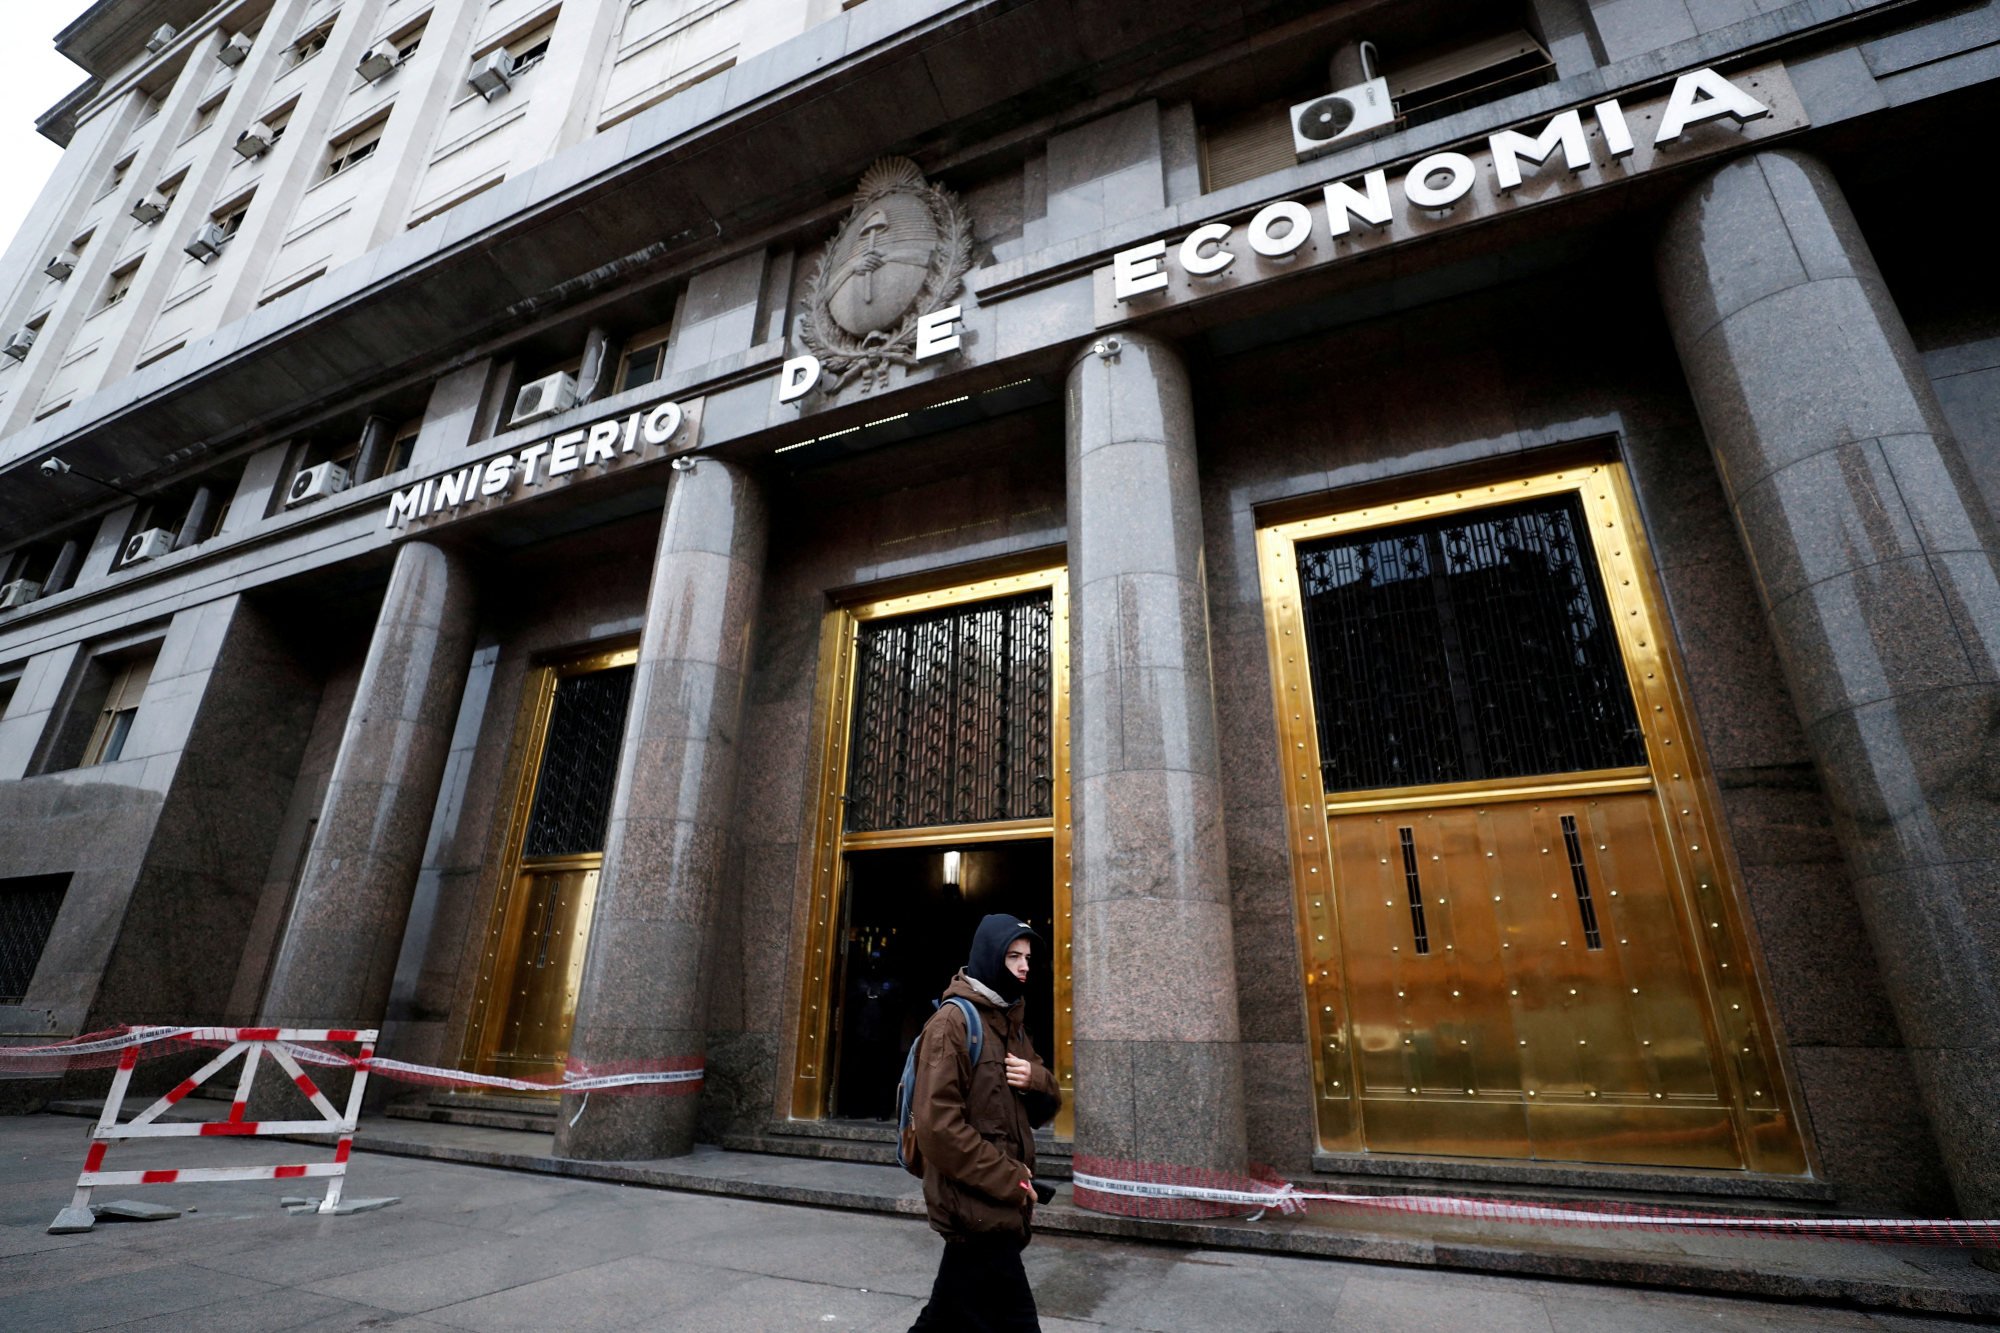 The Argentine Ministry of Economy says the terms of the swap with the People’s Bank of China are part of a confidential agreement and cannot be made public. Photo: Reuters